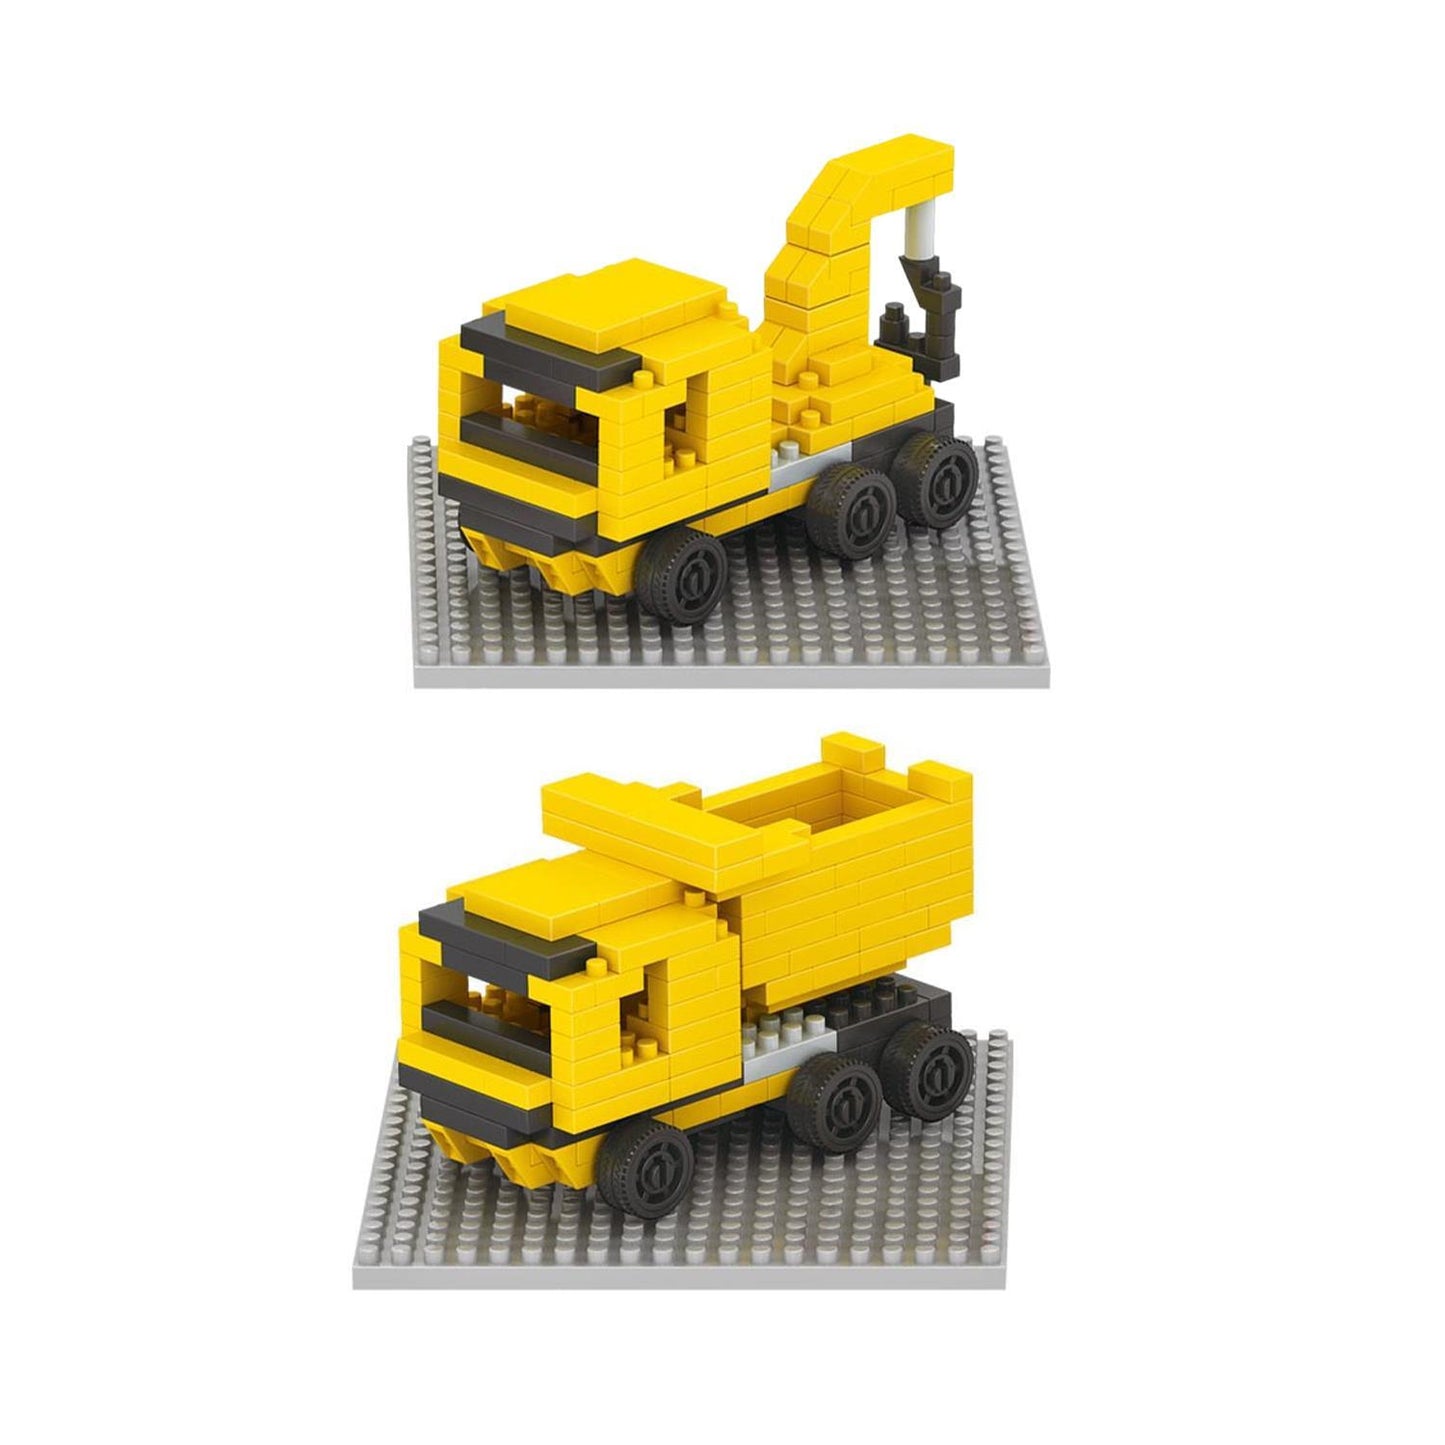 2-in-1 Tiny Twist Construction Truck